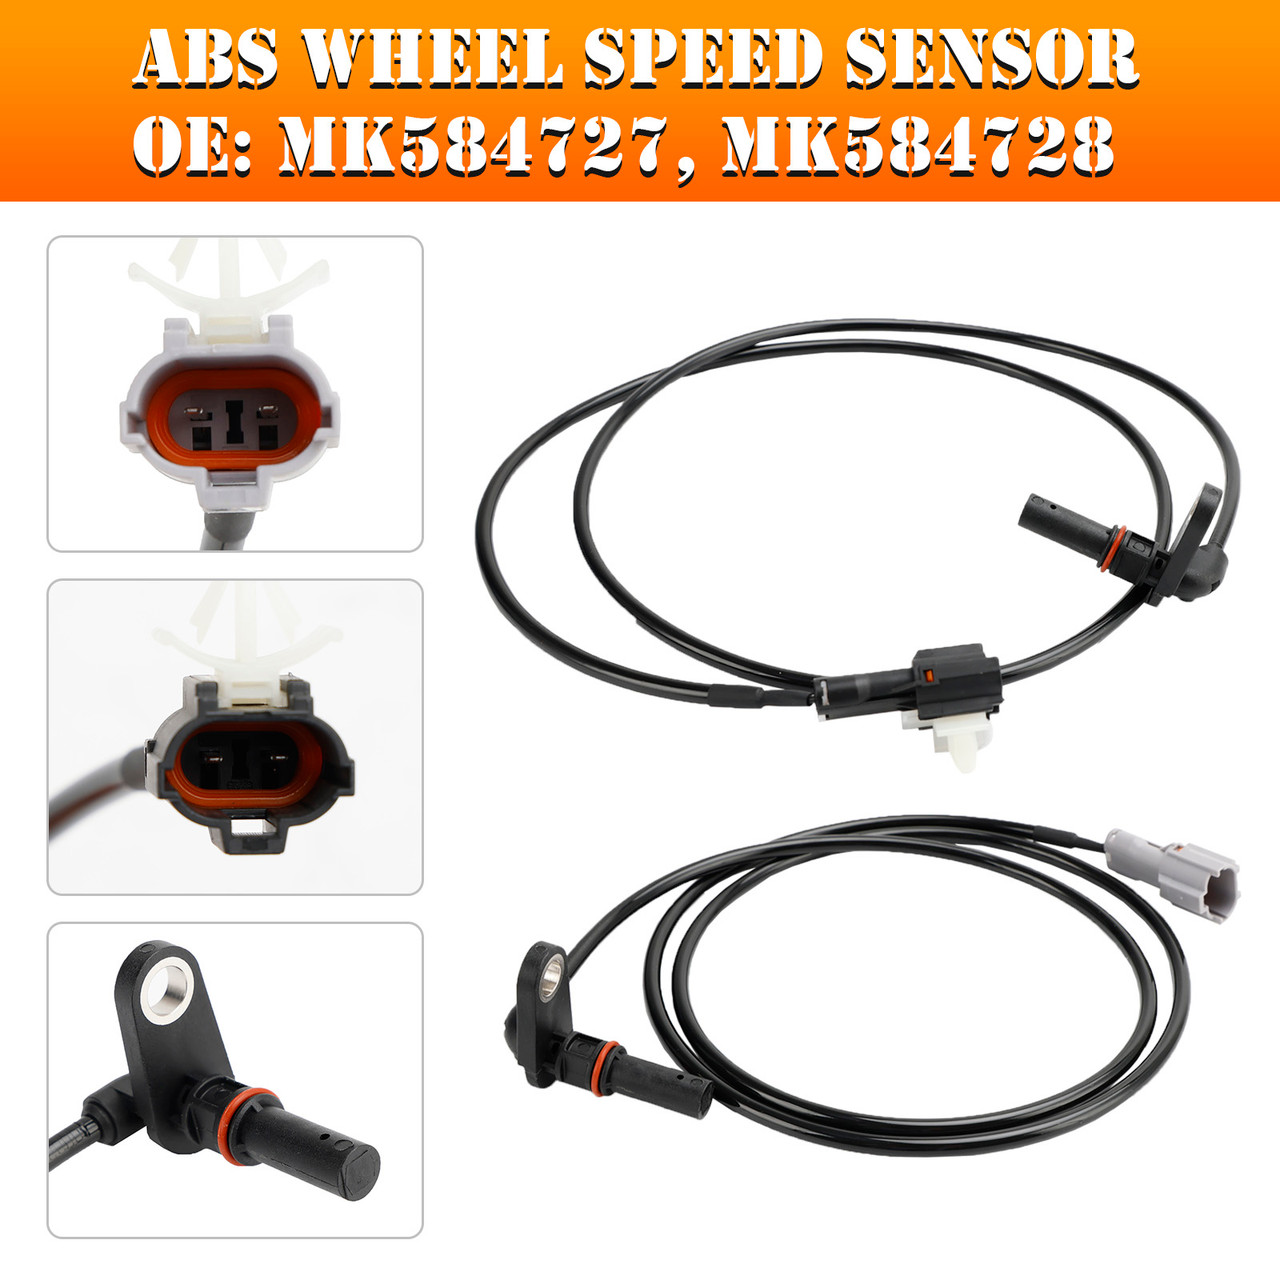 2Pcs Front Left & Right ABS Wheel Speed Sensor For Mitsubishi Fuso Canter 3.0